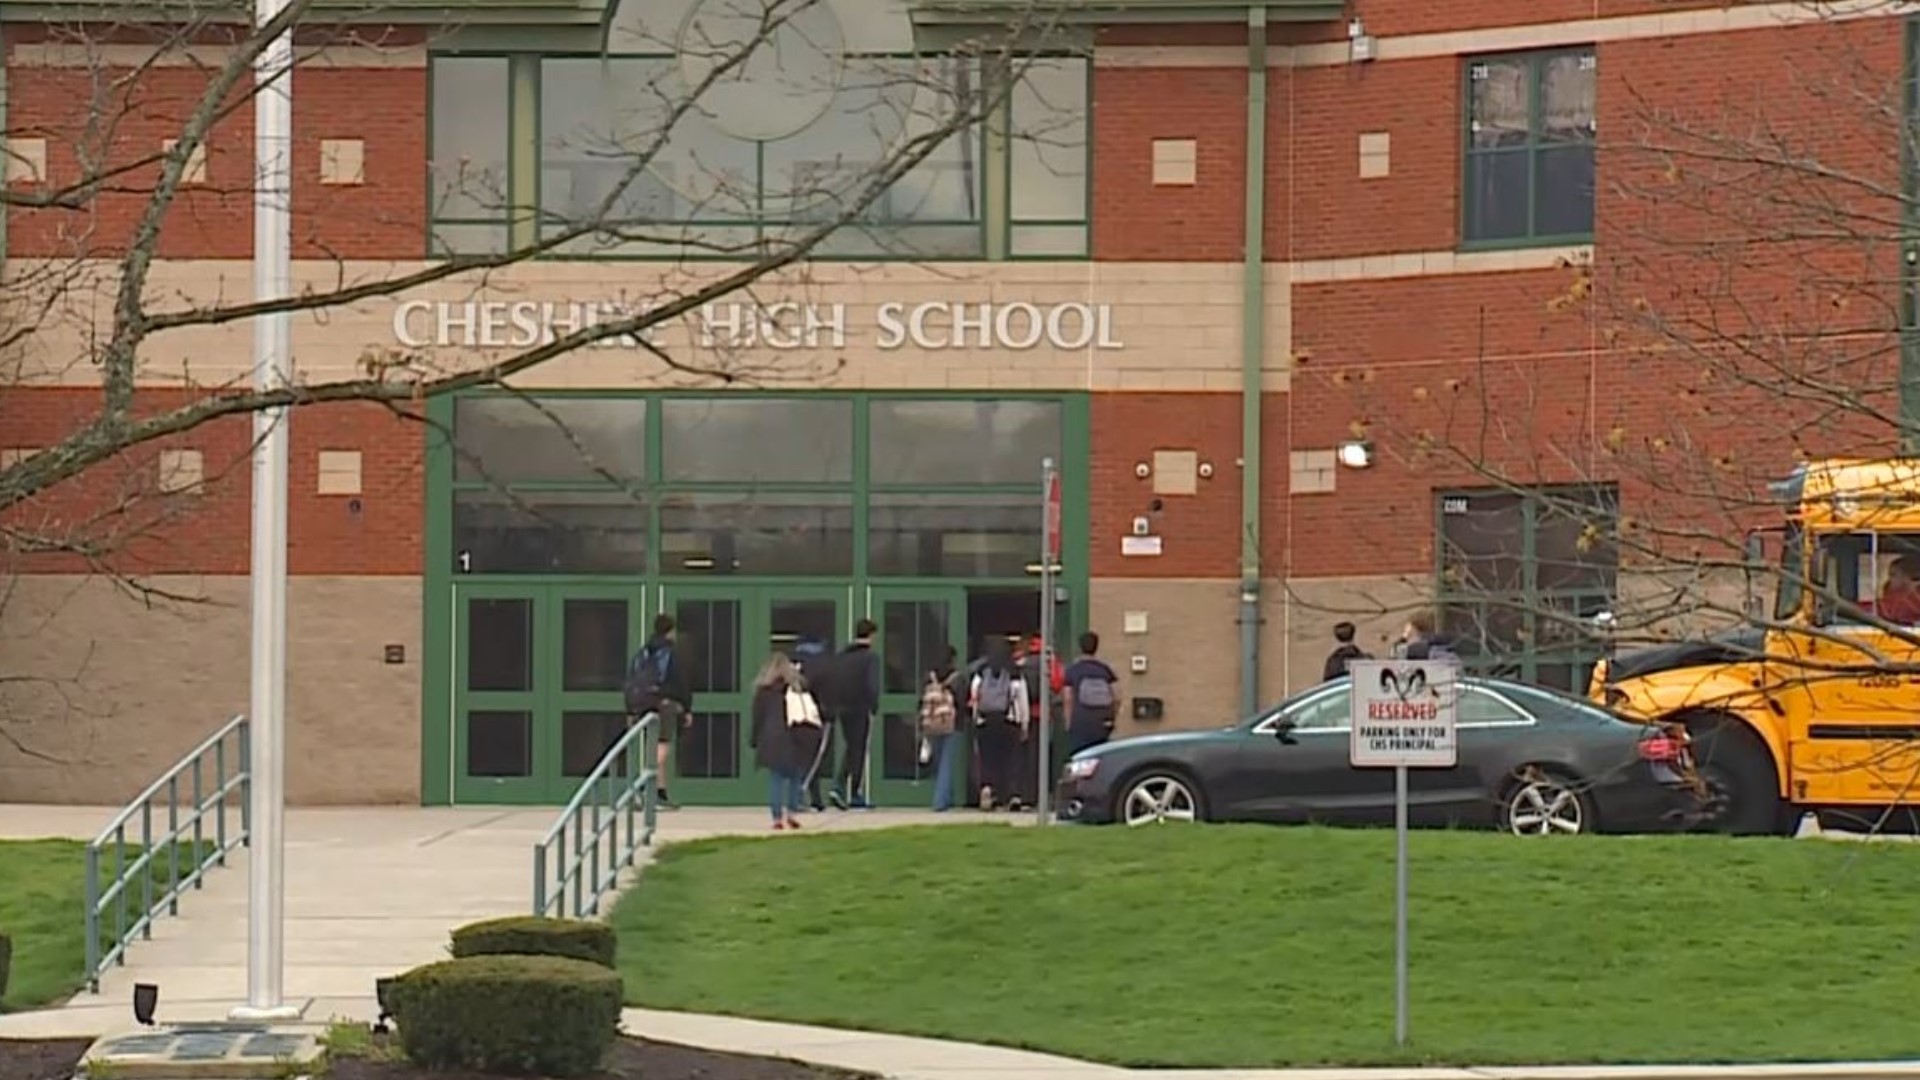 Outrage continues in Cheshire over a now-deleted Facebook post that called students from New Haven who attend the high school “thugs.”